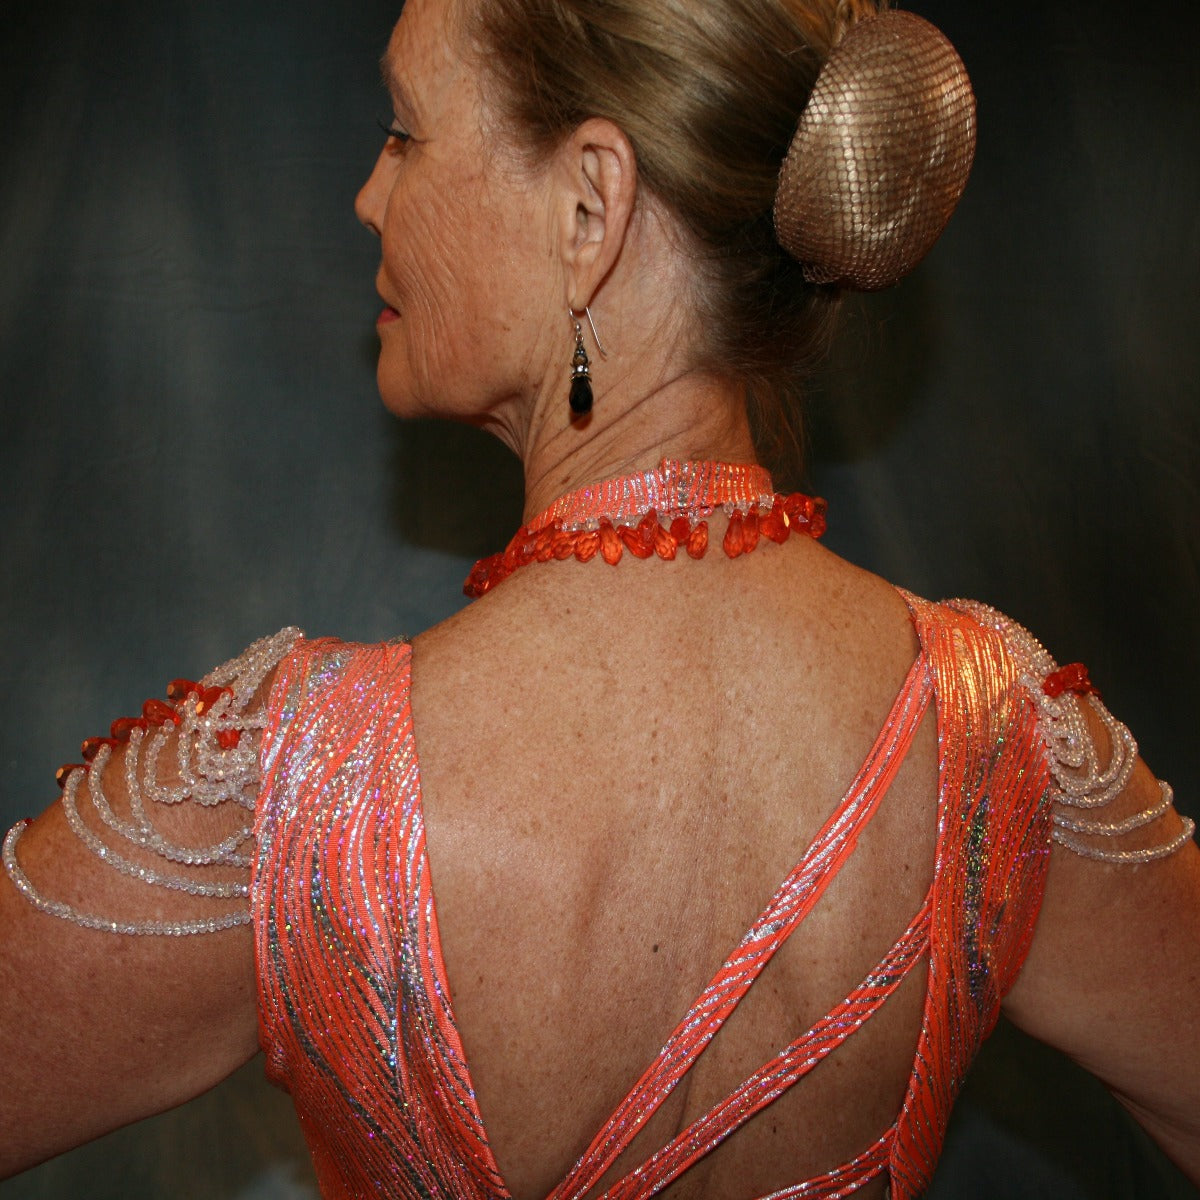 Crystal's Creations close up back view of Orange Latin/rhythm dress was created in orange & silver metallic print lycra with oodles of glitter organza flounces & accents, has back strap detailing, embellished with extensive Swarovski hand beading & has matching Swarovski hand beaded neckpiece.